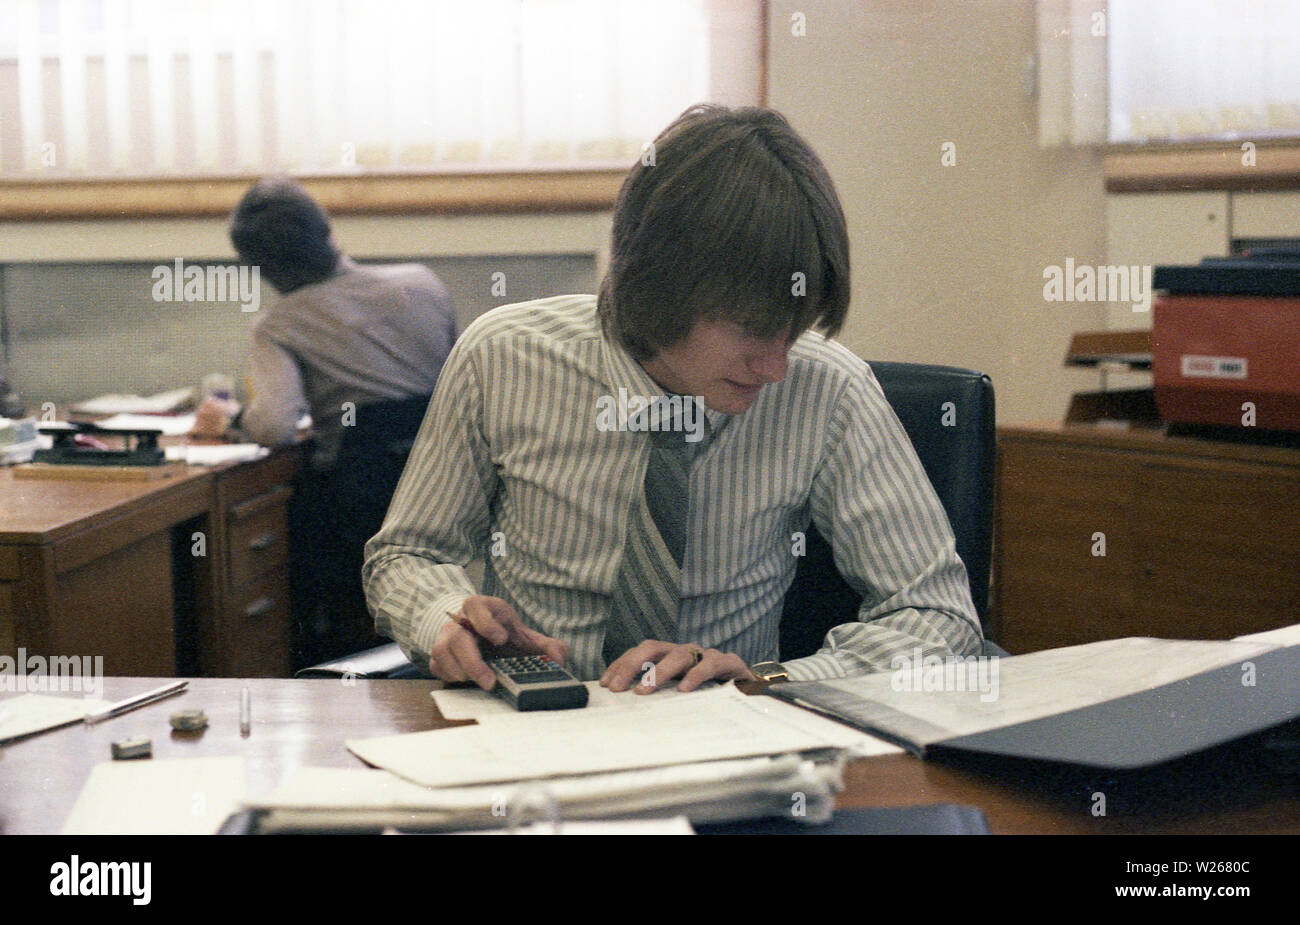 1970s, historical, a male, late twenties, or early thirties in age in an office, sitting at a desk, working, a financial manager or possibly an accountant as he is using a small calculator to add figures from printed ledgers or journals, England, UK. Stock Photo